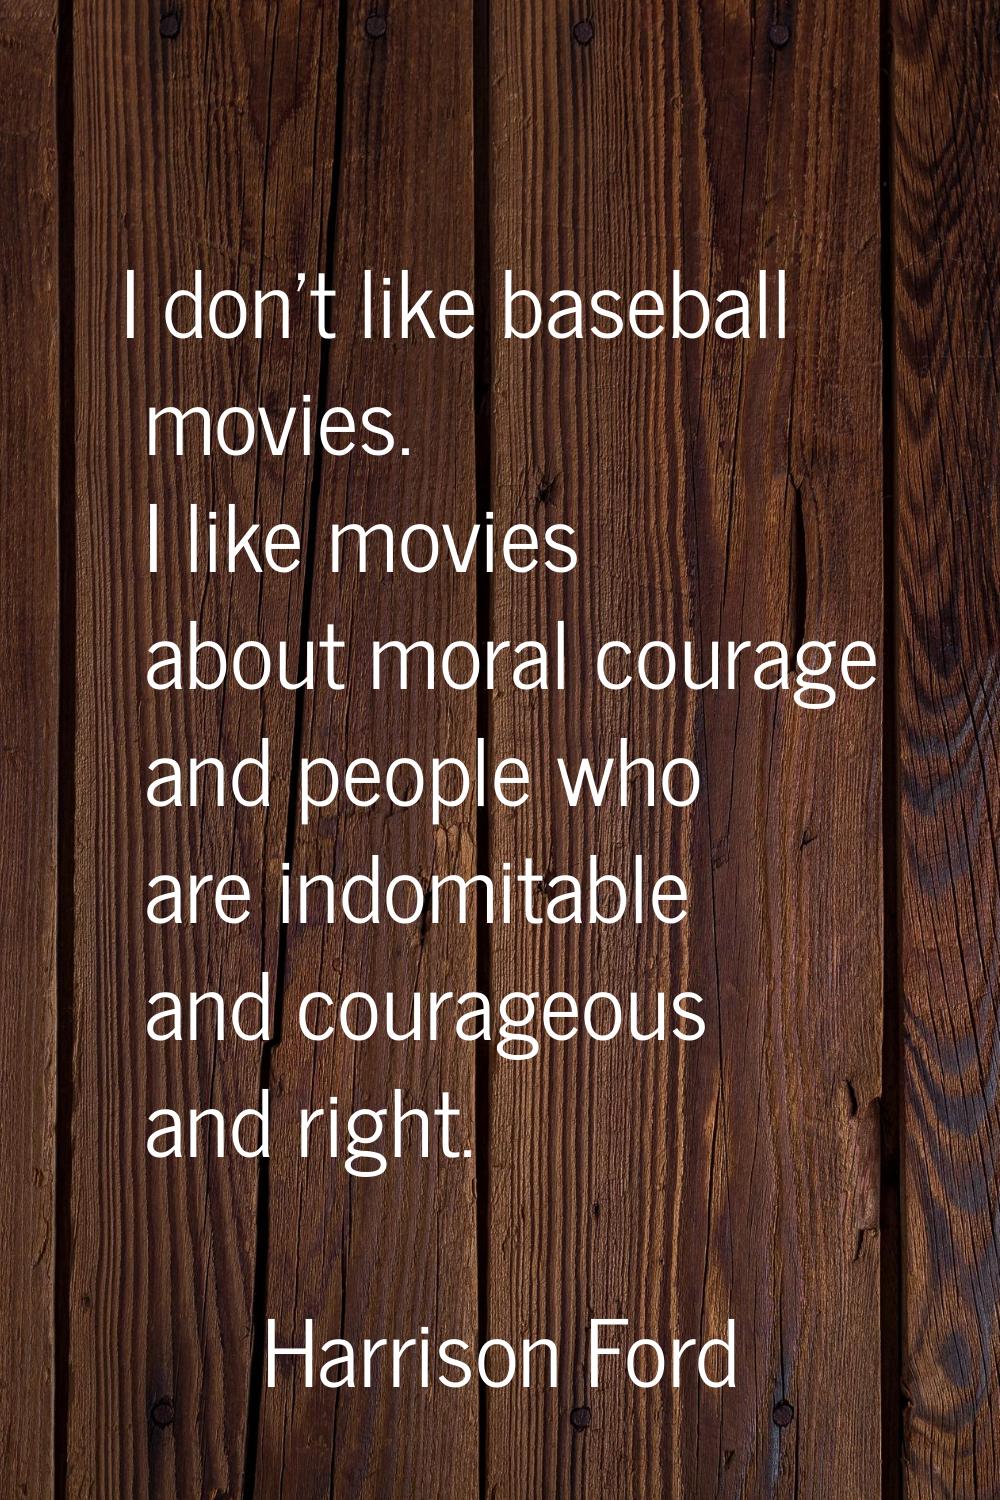 I don't like baseball movies. I like movies about moral courage and people who are indomitable and 